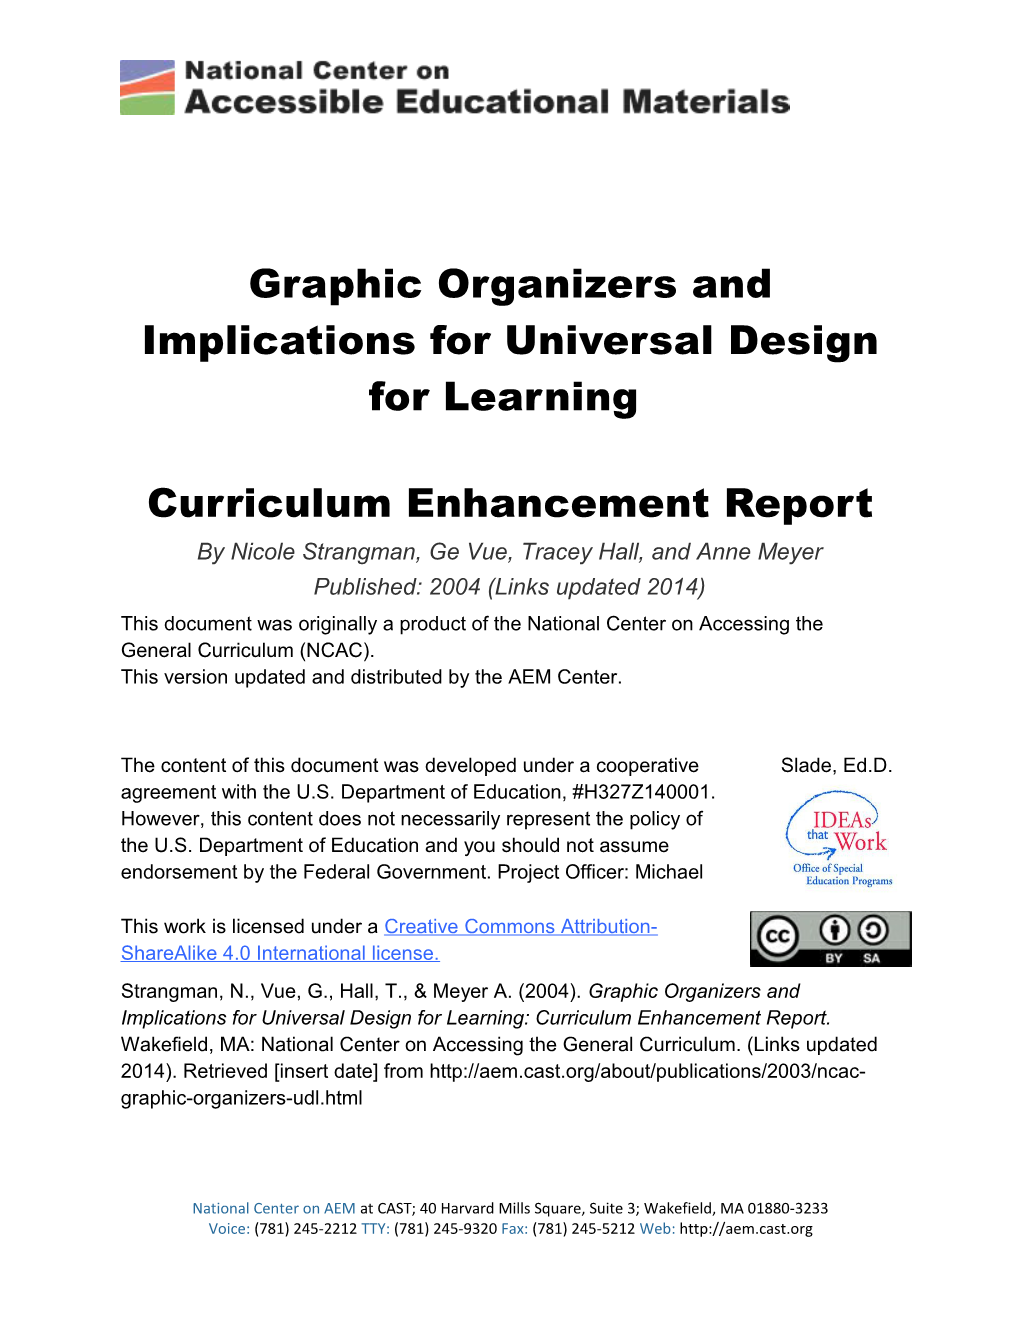 Graphic Organizers and Implications for Universal Design for Learning Curriculum Enhancement